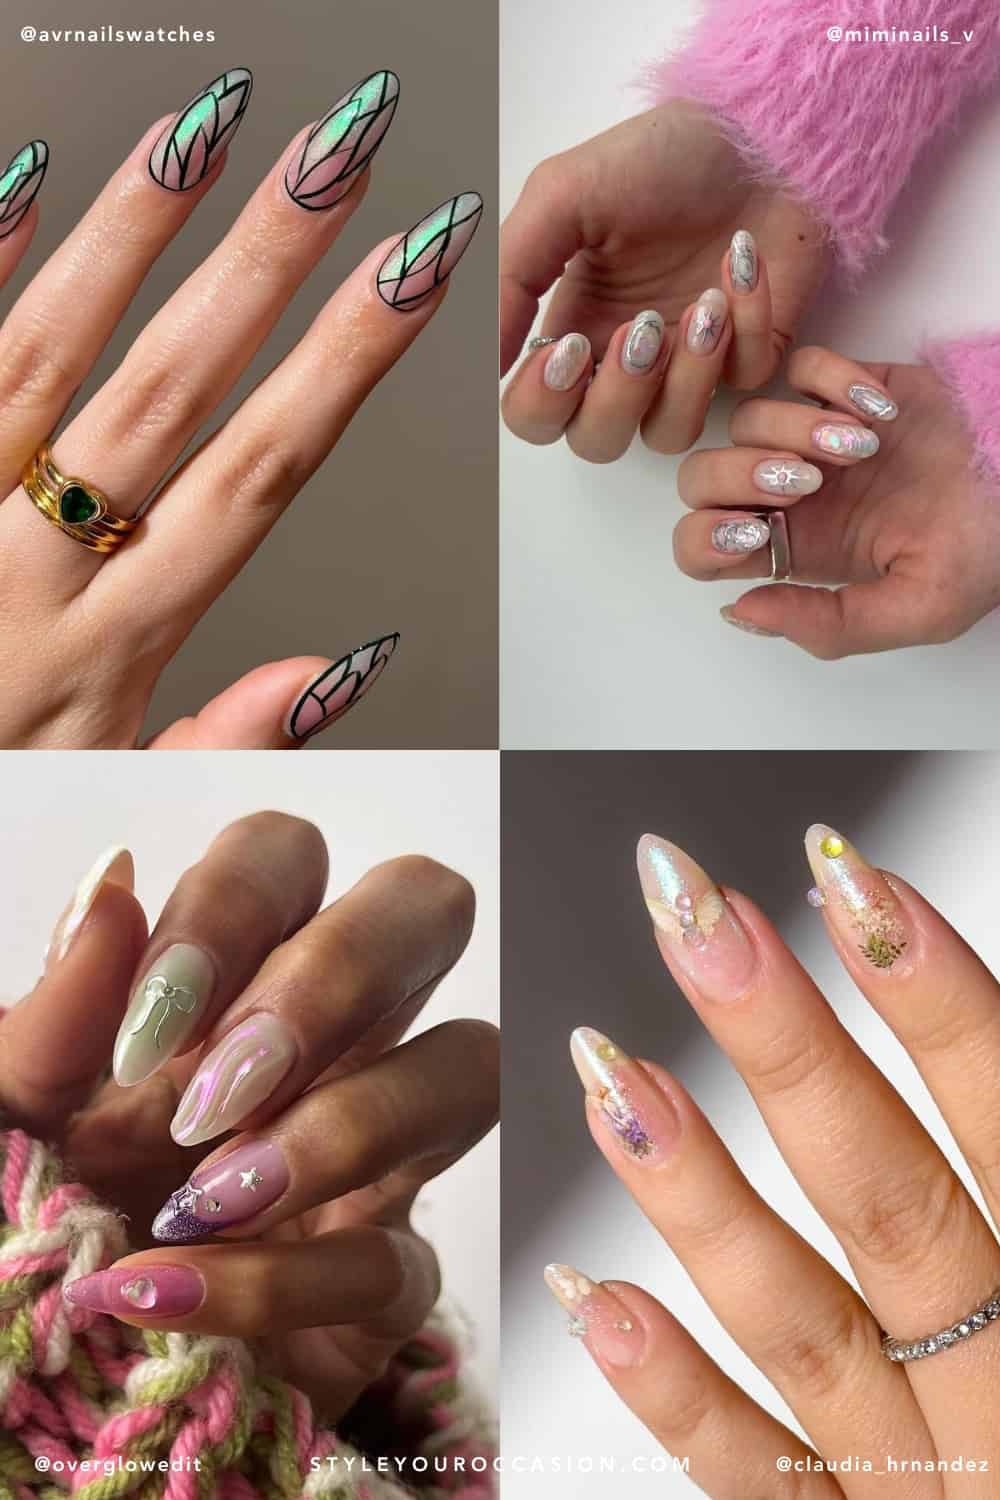 collage of four hands with fairy nails and fairy nail designs with wings, starts, and more